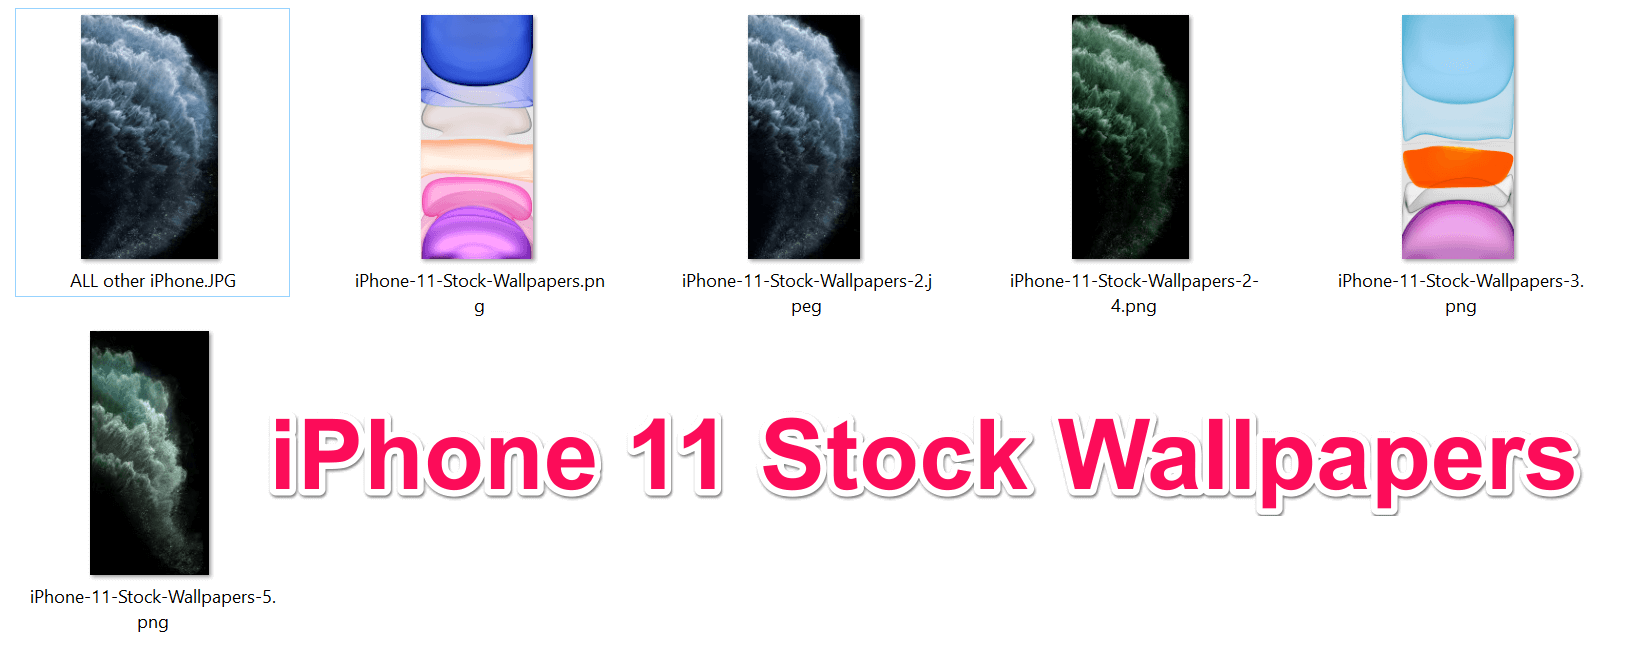 iPhone 11 Stock Wallpapers